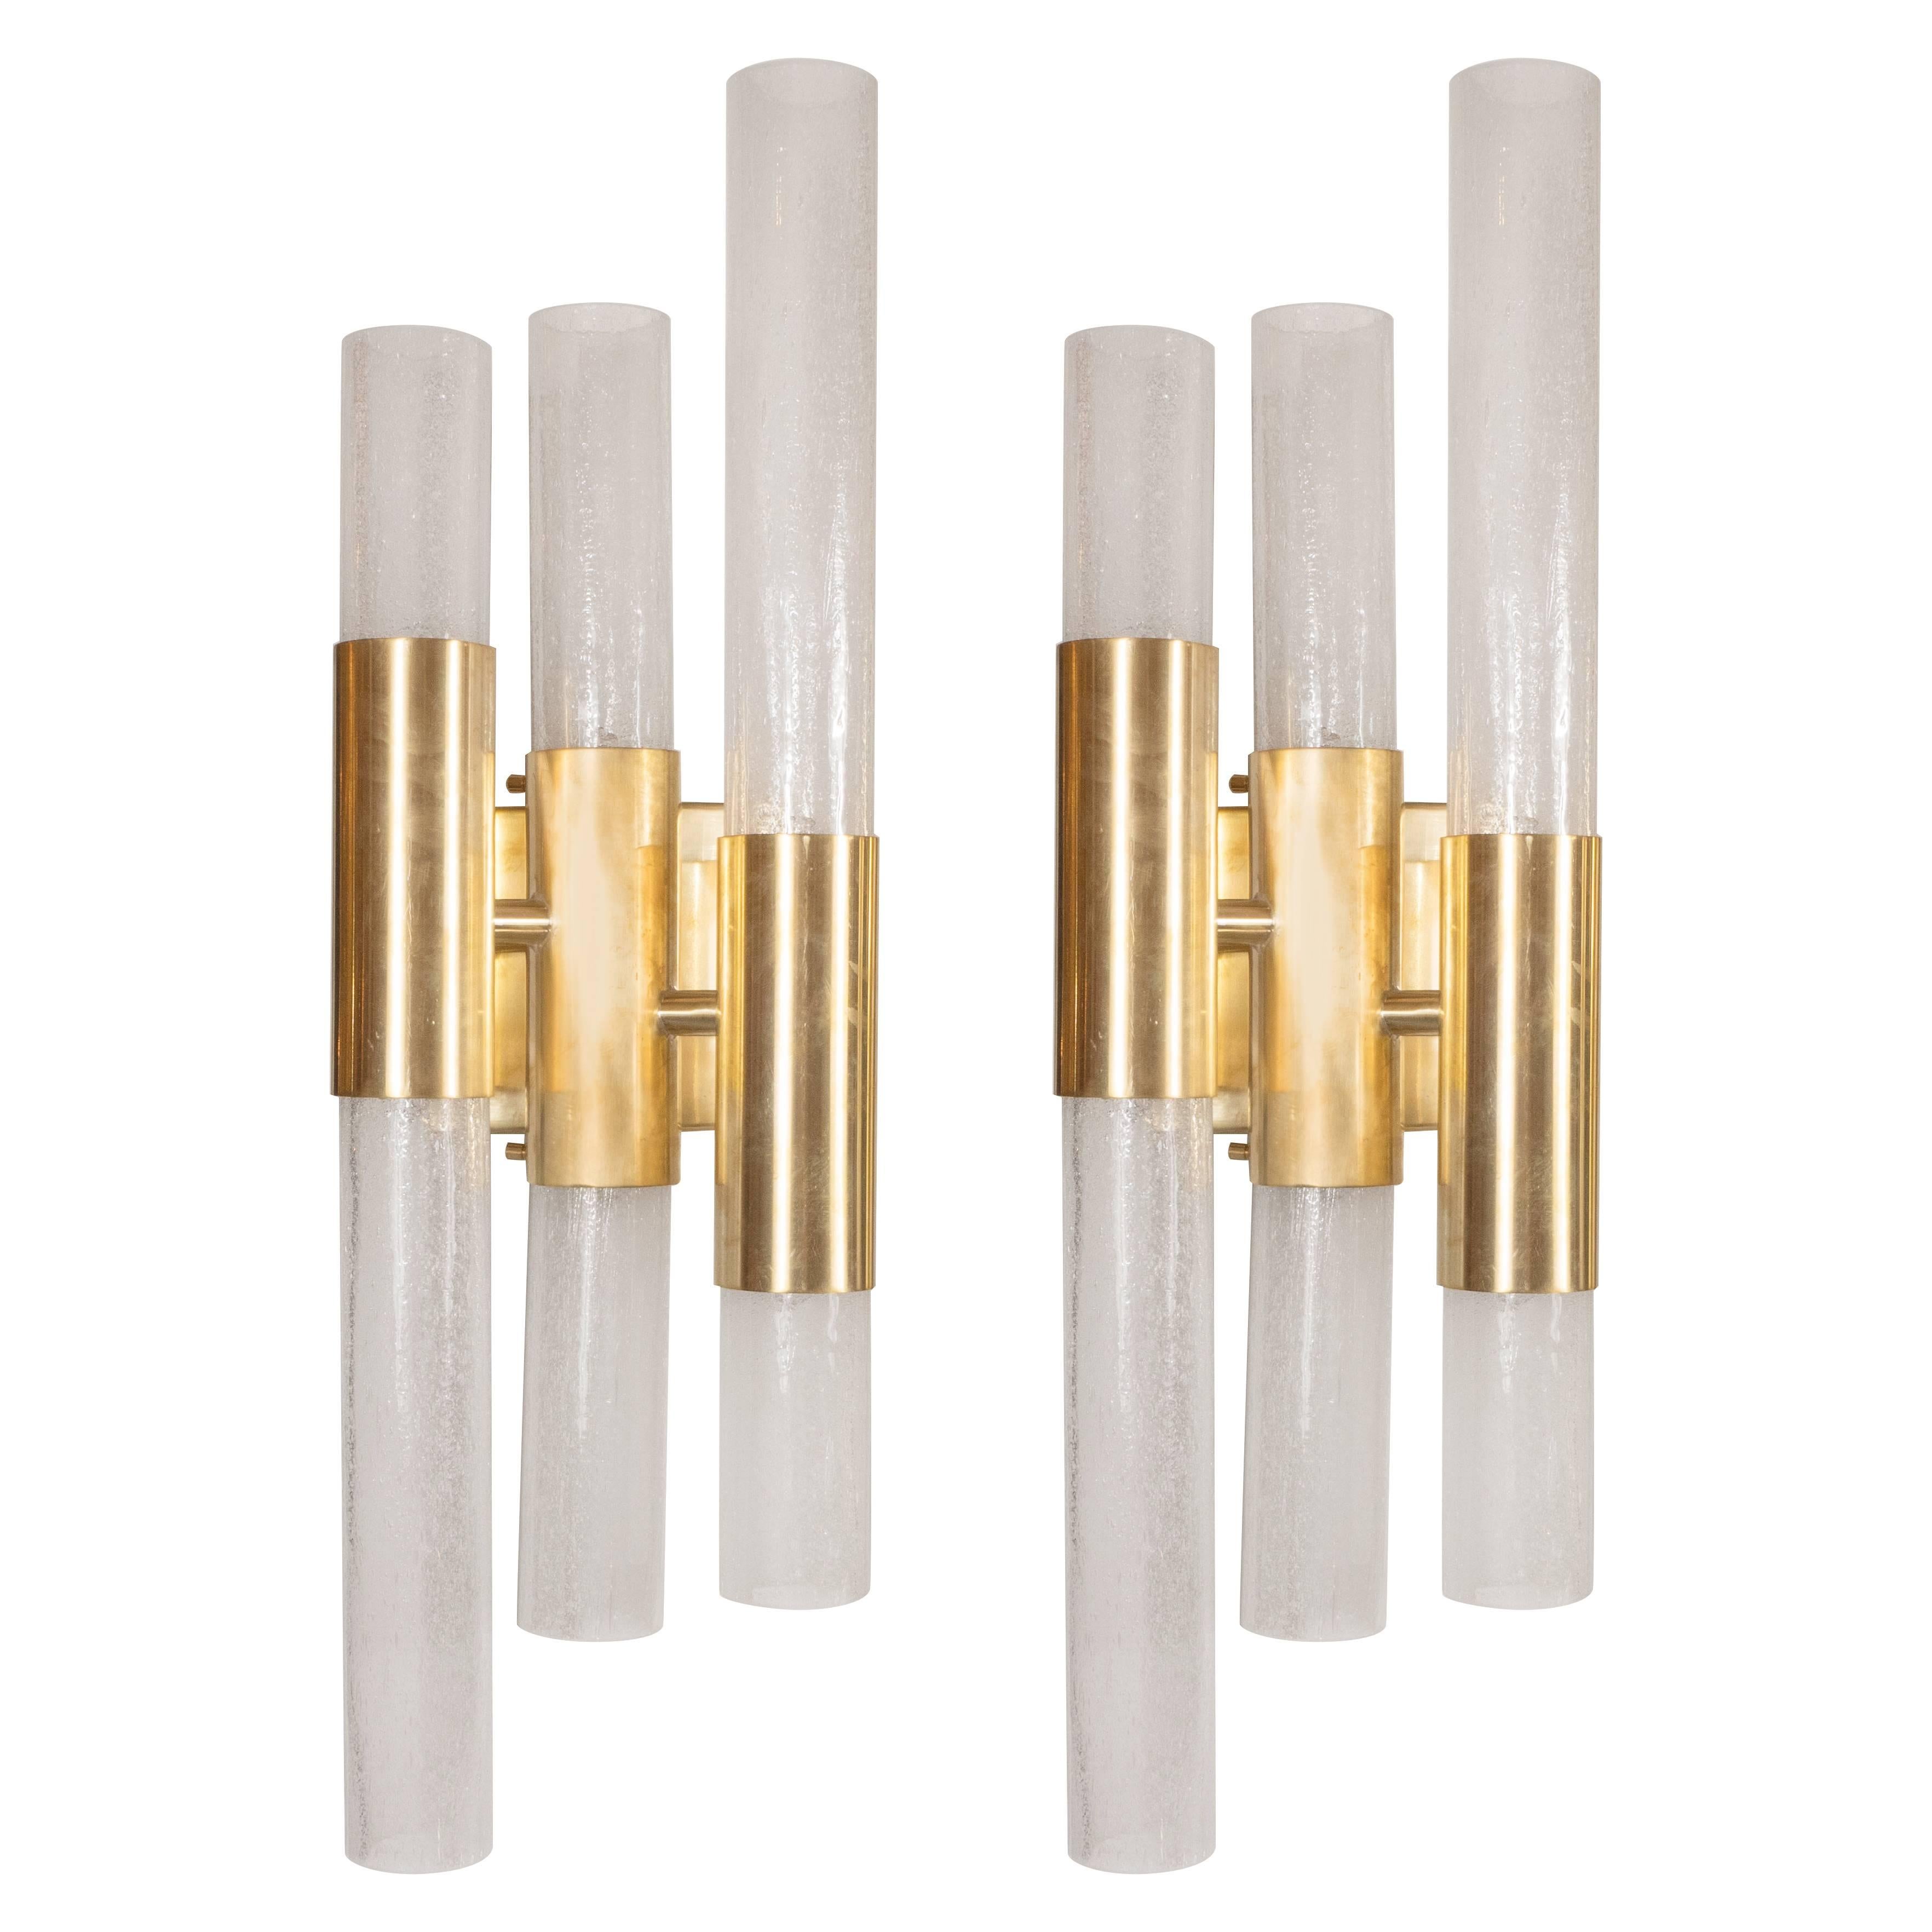 Pair of Modernist Pulegoso Sconces with Handblown Murano Shades & Brushed Brass